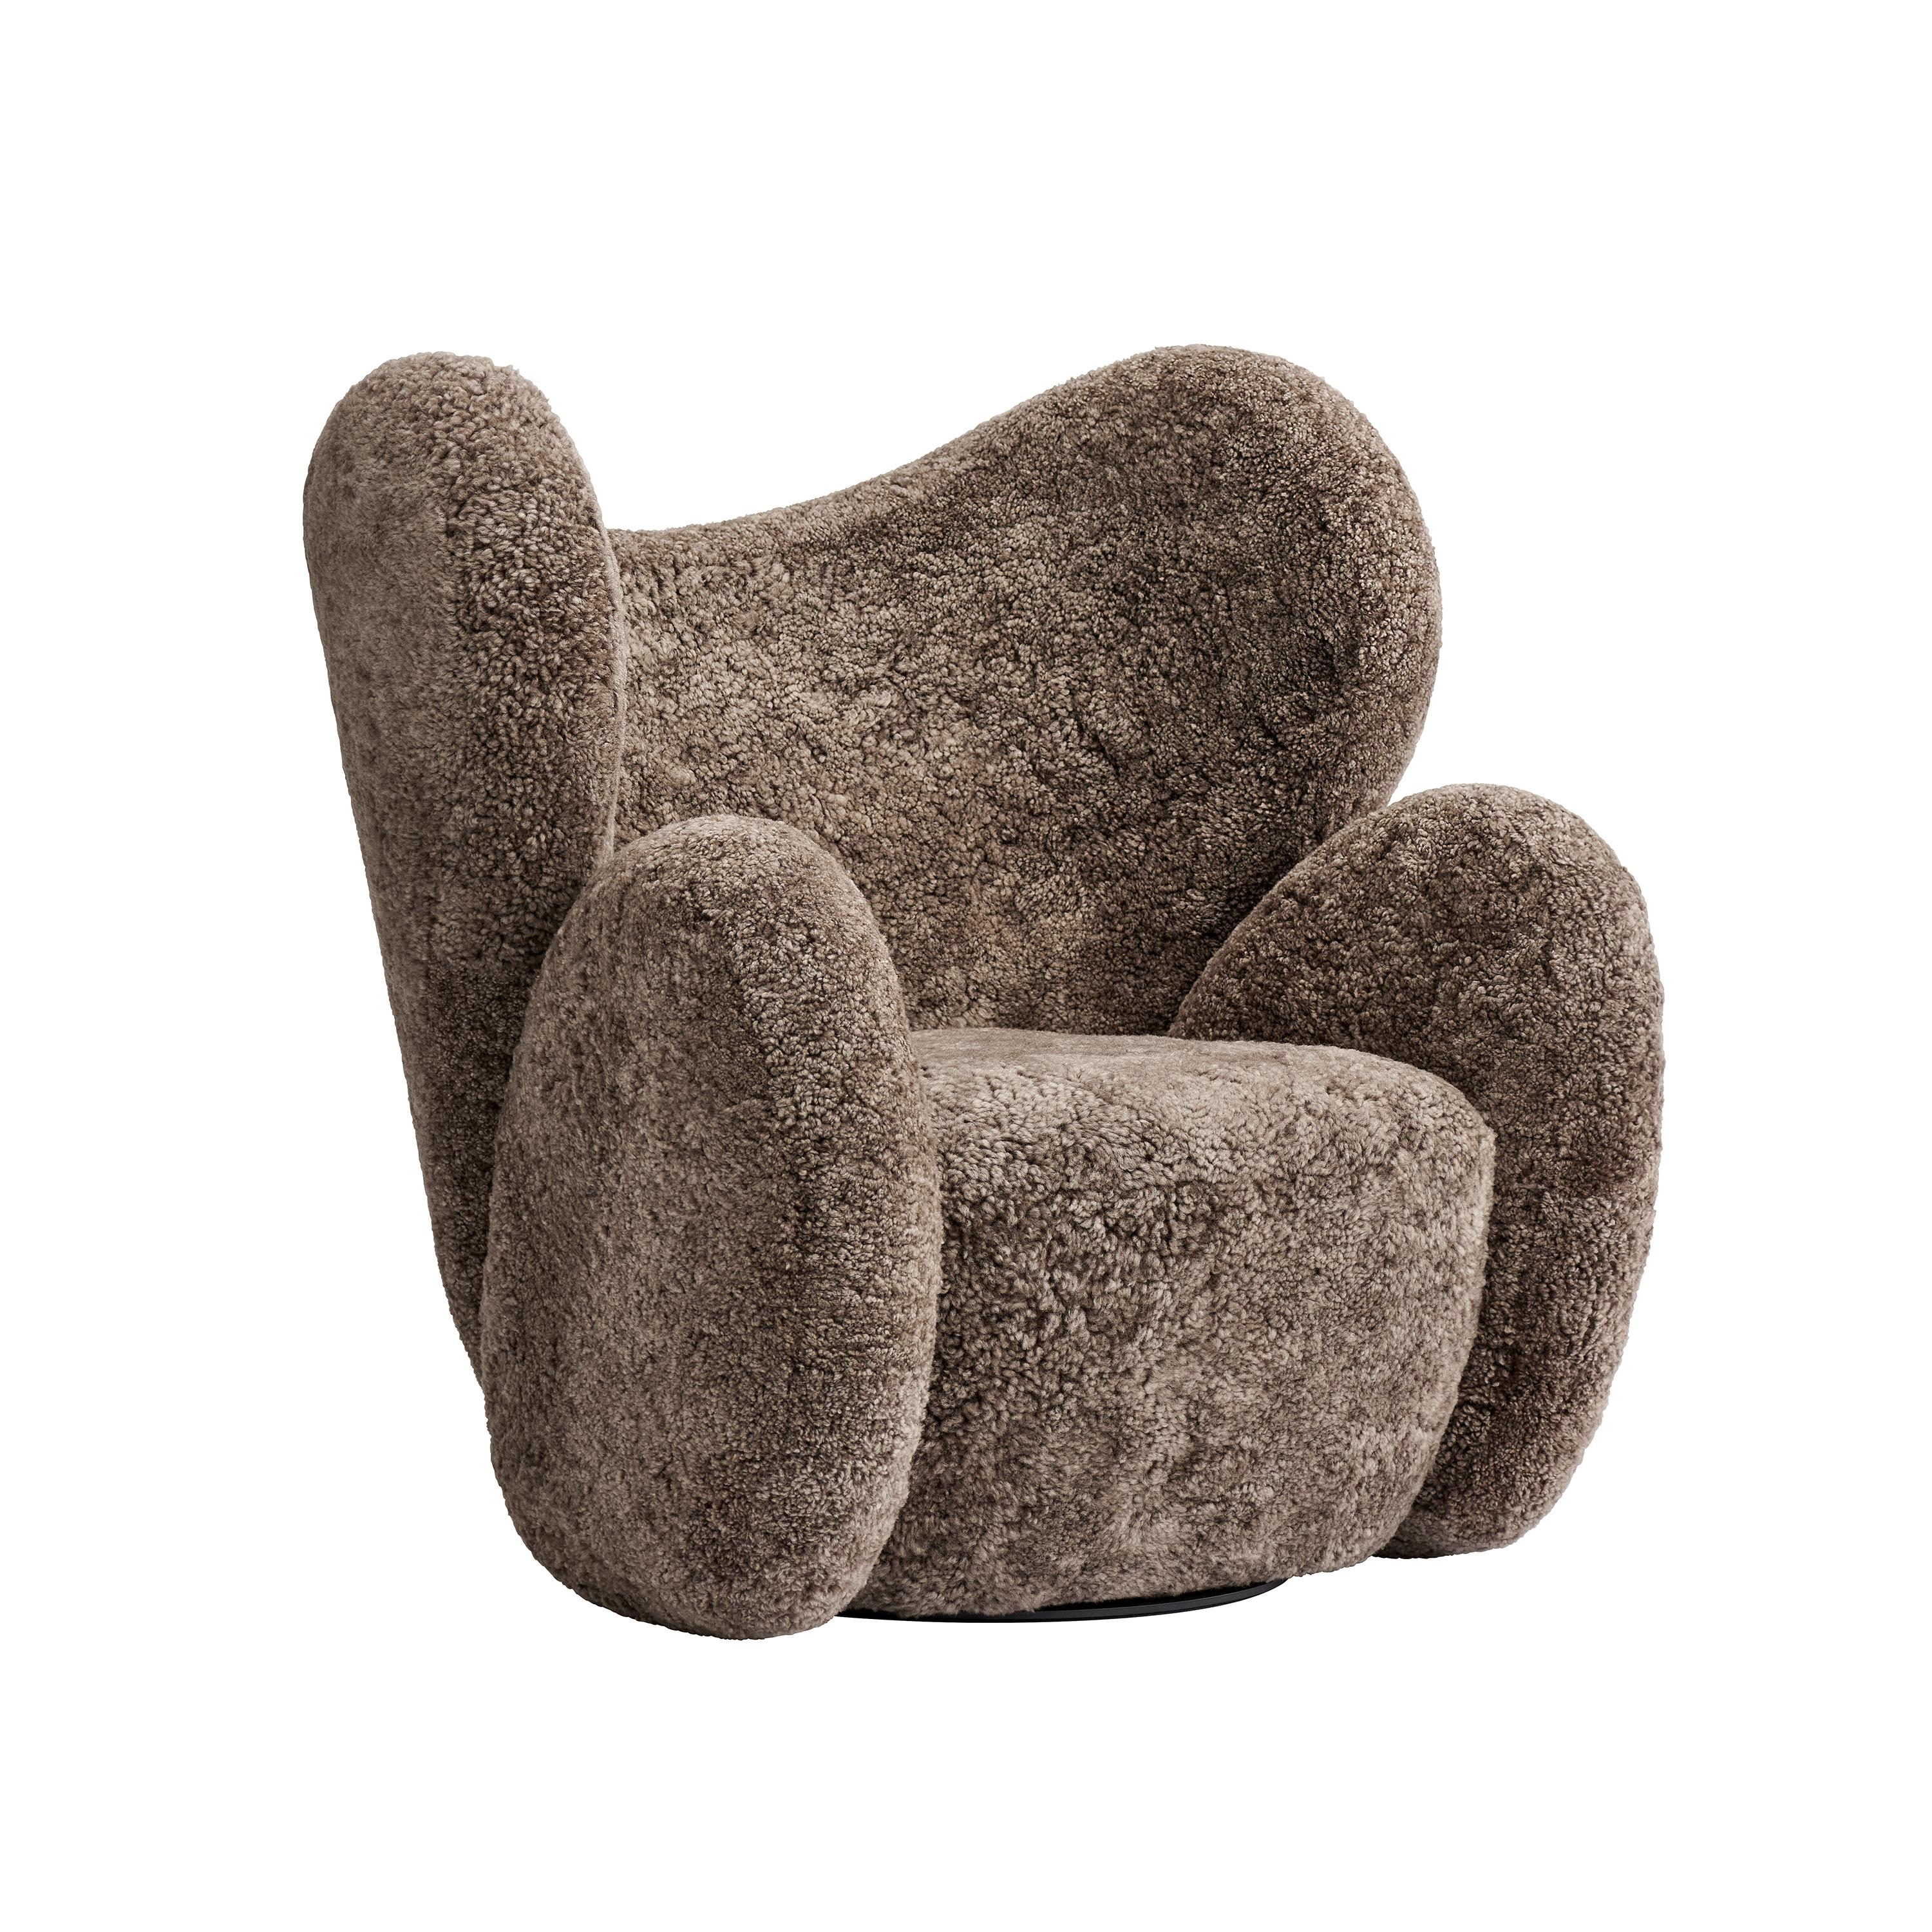 BIG BIG CHAIR Armchair
Signed by Kristian Sofus Hansen and Tommy Hyldahl for Norr11. 

Model shown on the picture:
Fabric: Sheepskin (07 Sahara)
Made in Italy

Appropriately named, the Big Big Chair is the bigger version of the compact Little Big